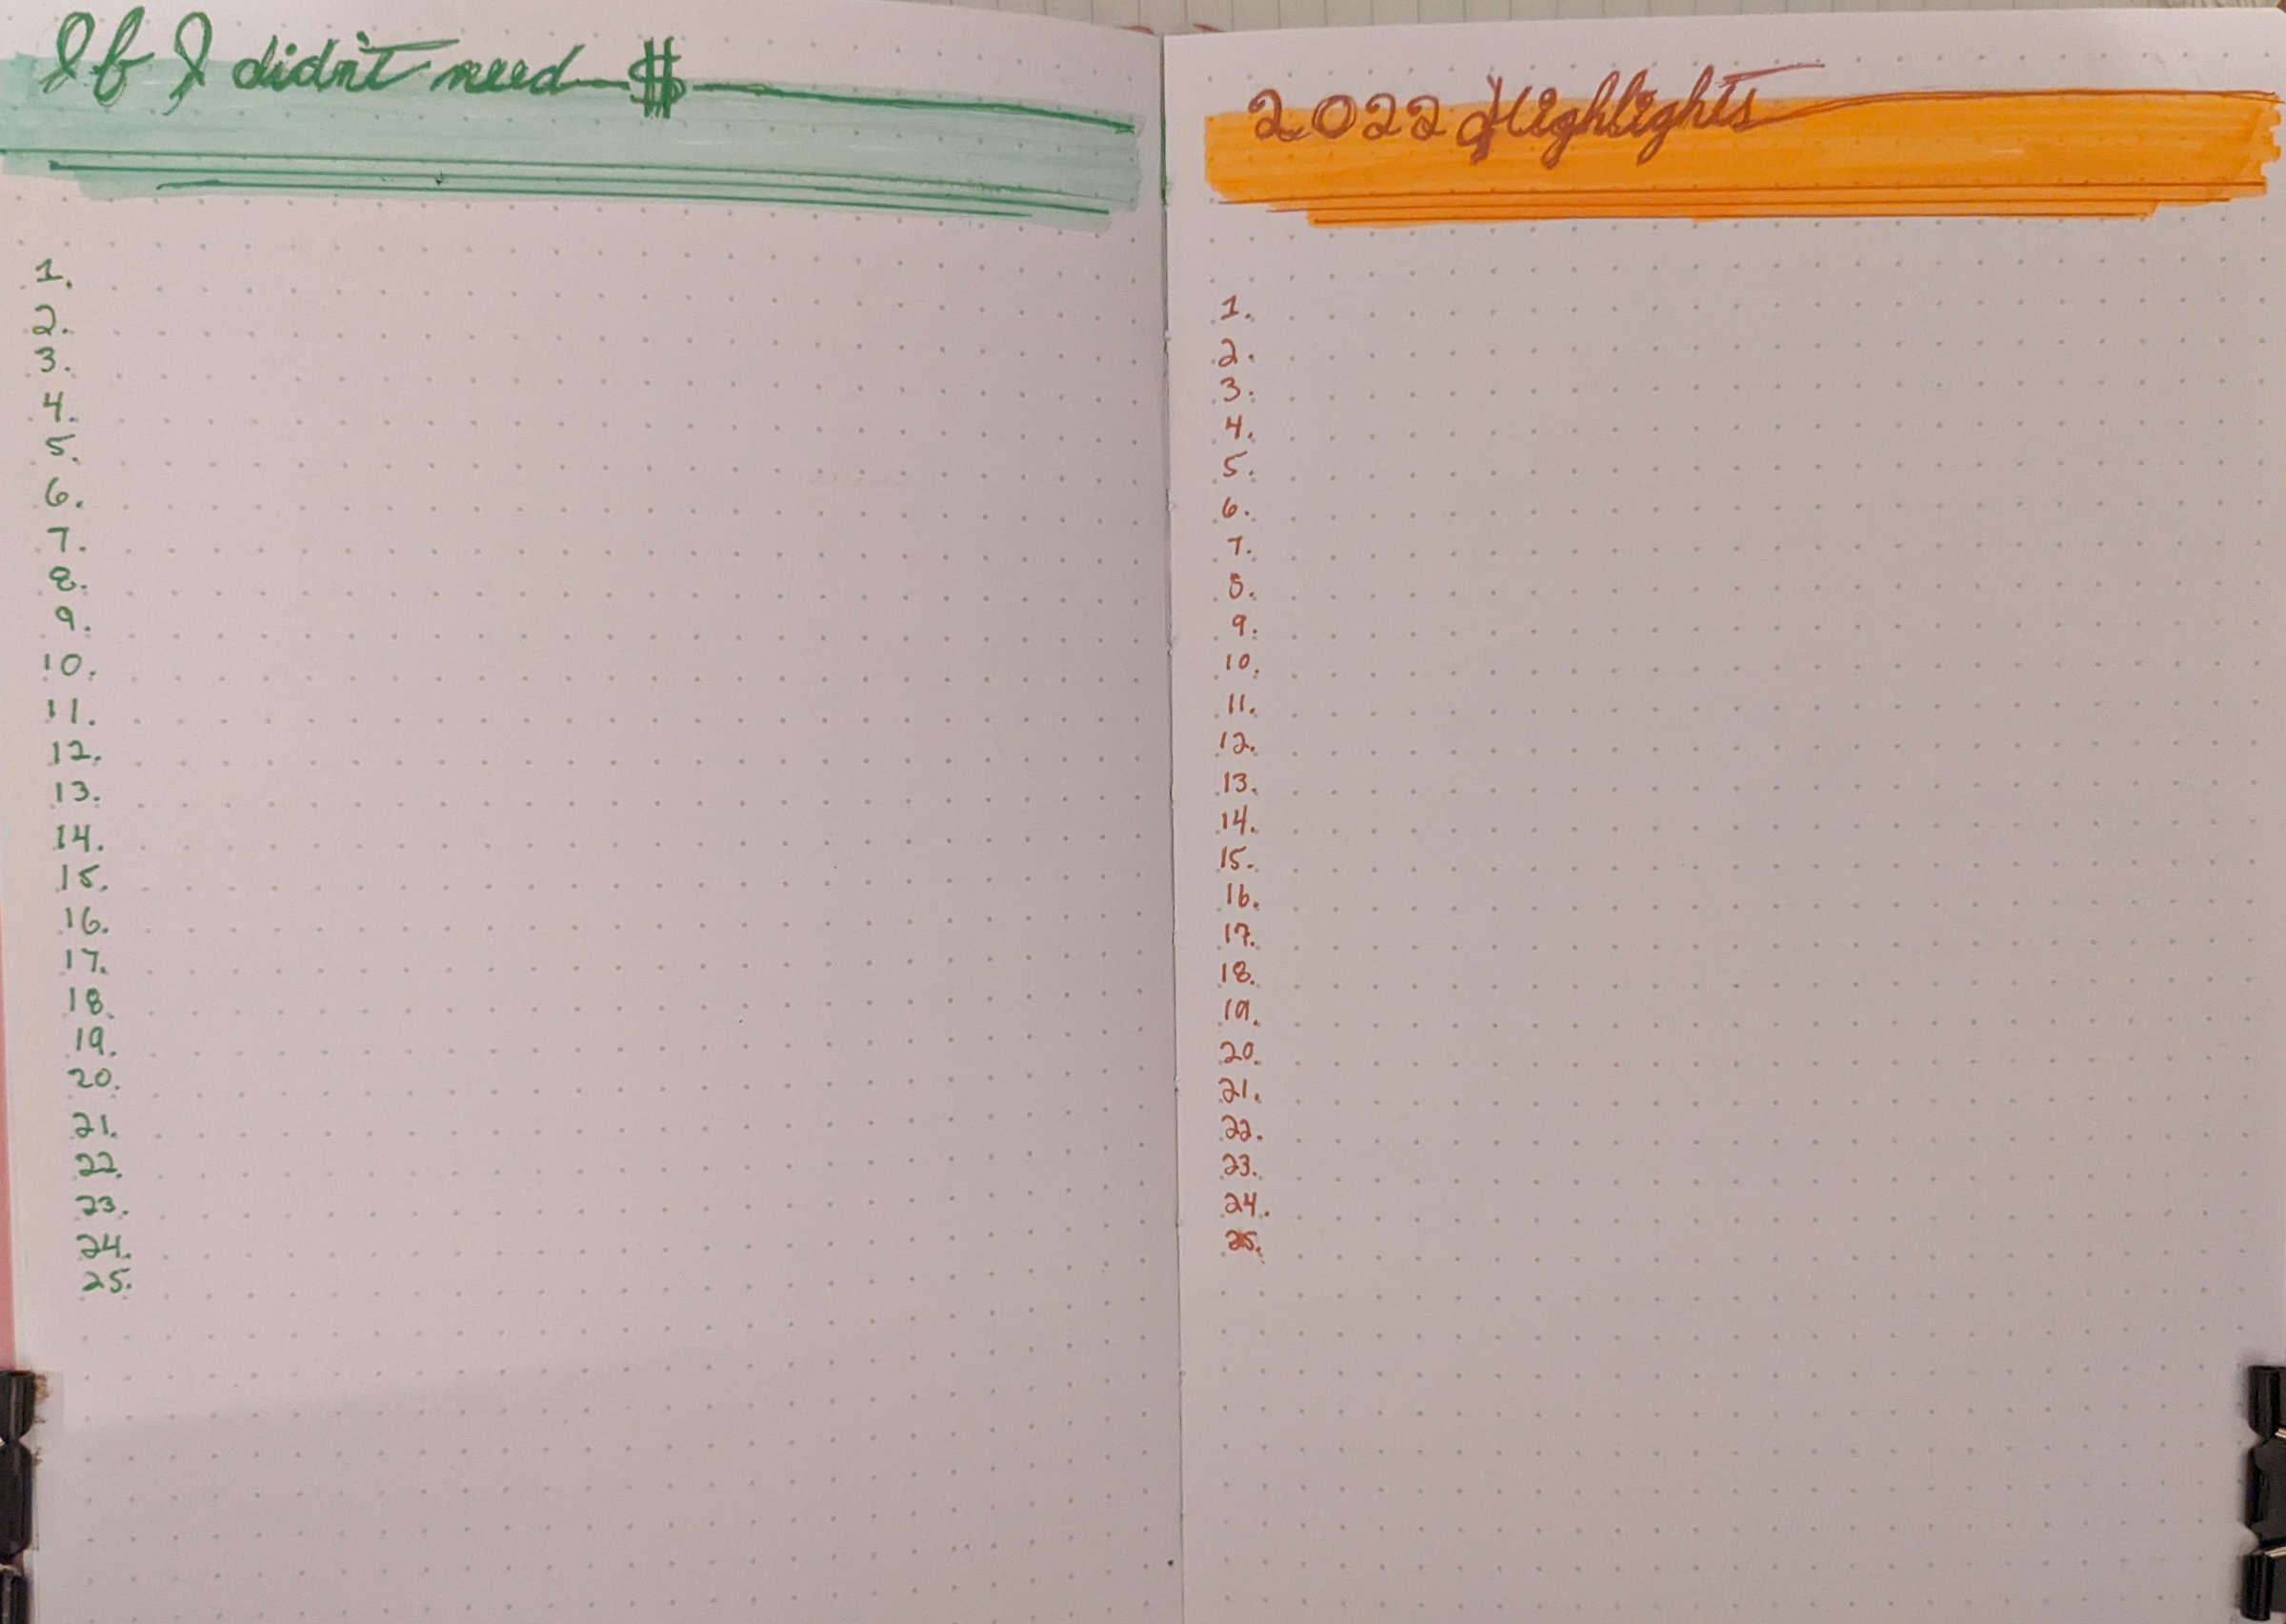 Two-page bullet journal spread. On the left is an “if I didn’t need money” section.  On the right is a “highlights” section.